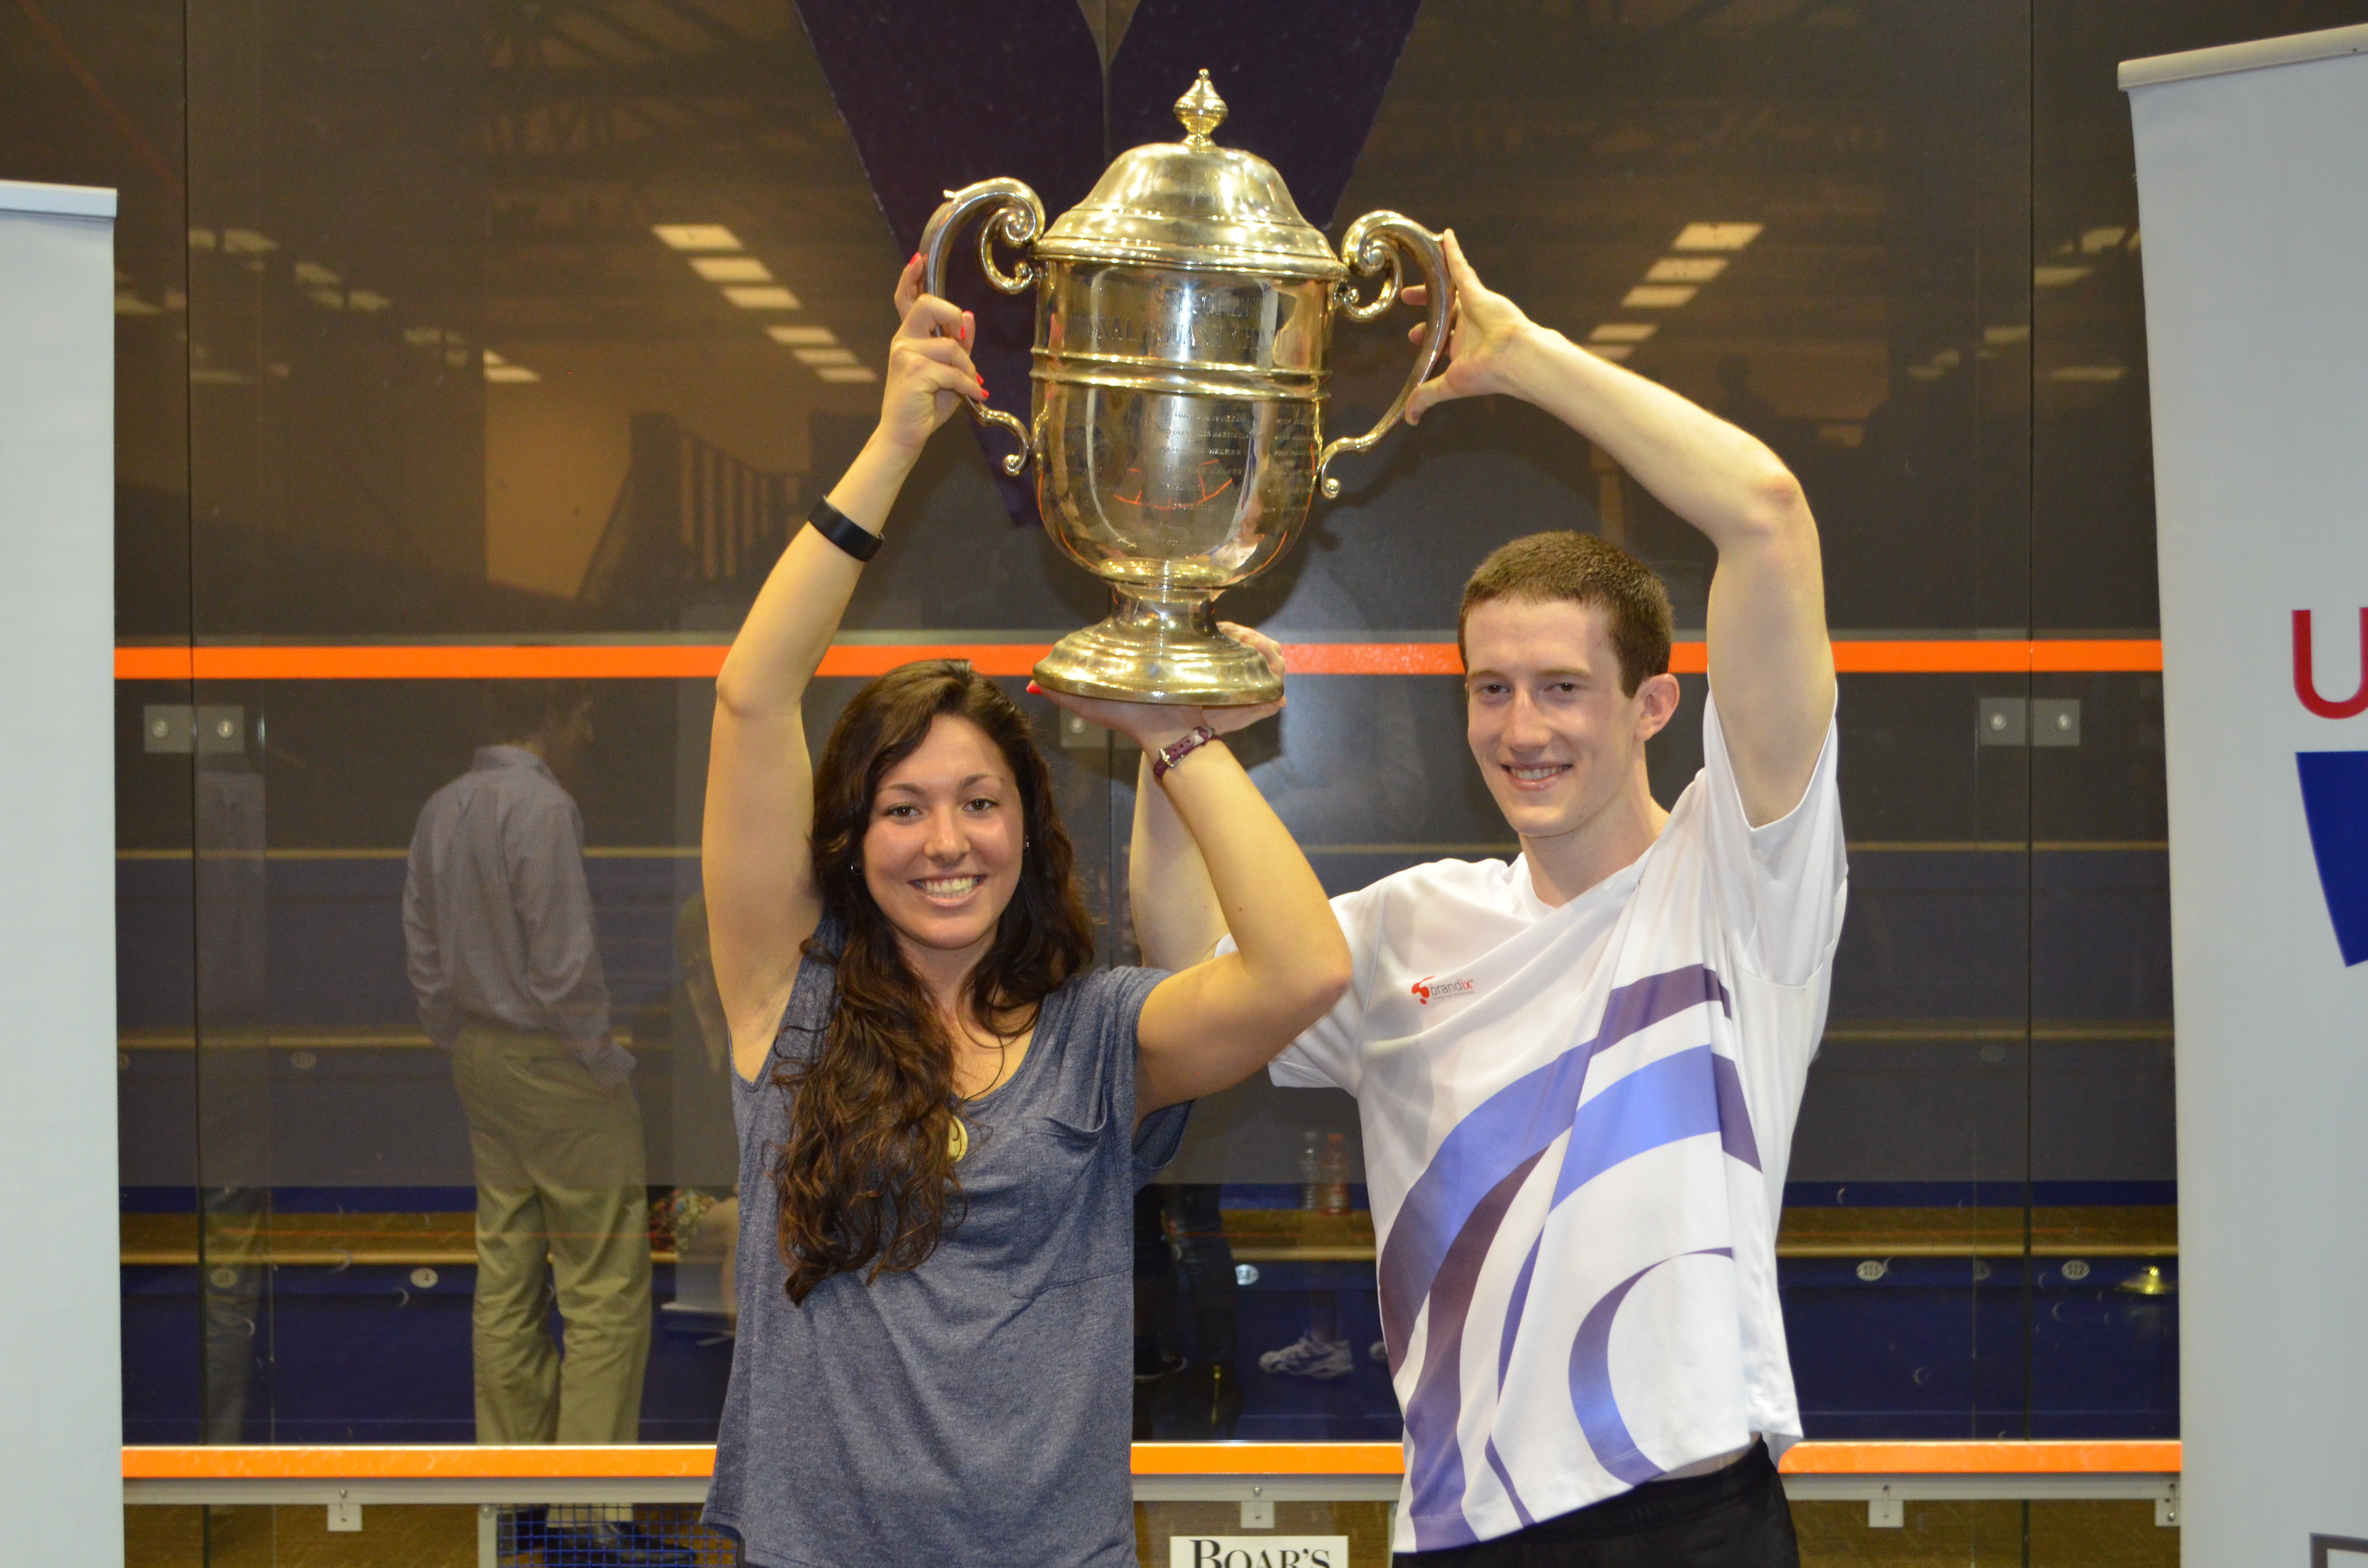 amanda and todd both hold SLG trophy